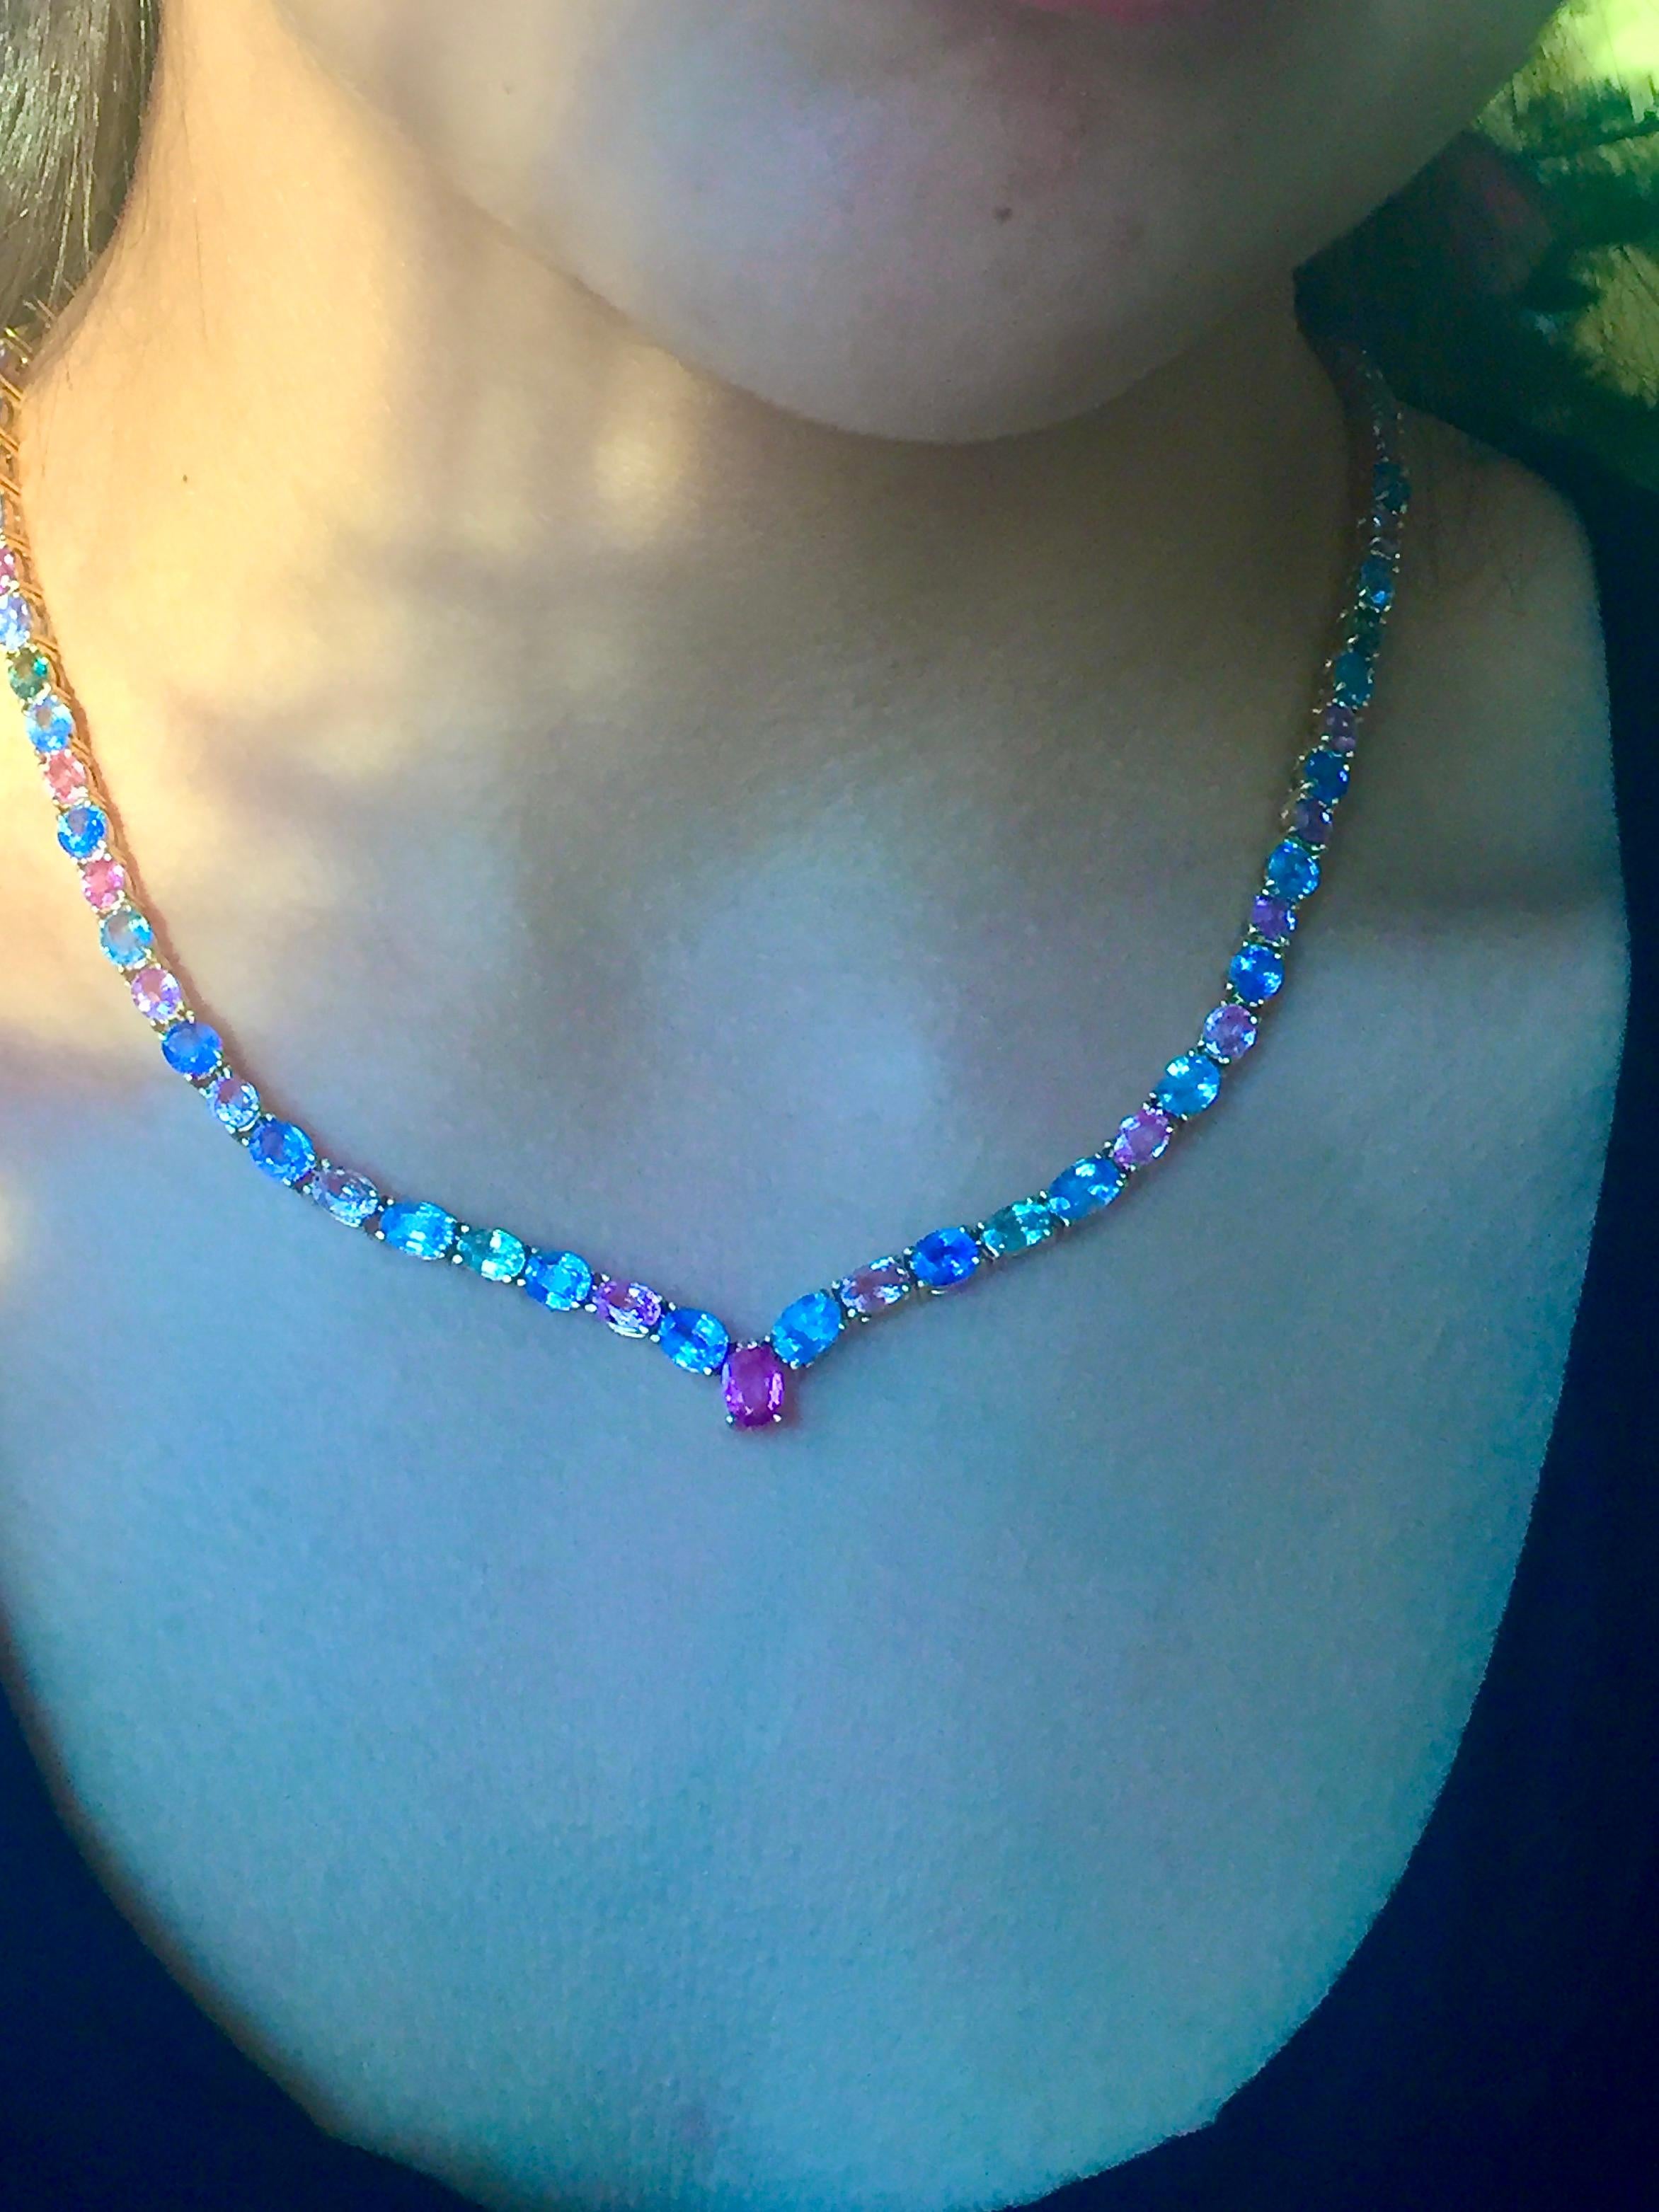  50.00 Carat Burma Unheated Multicolor Sapphires Necklace Yellow Gold 18K  For Sale 3